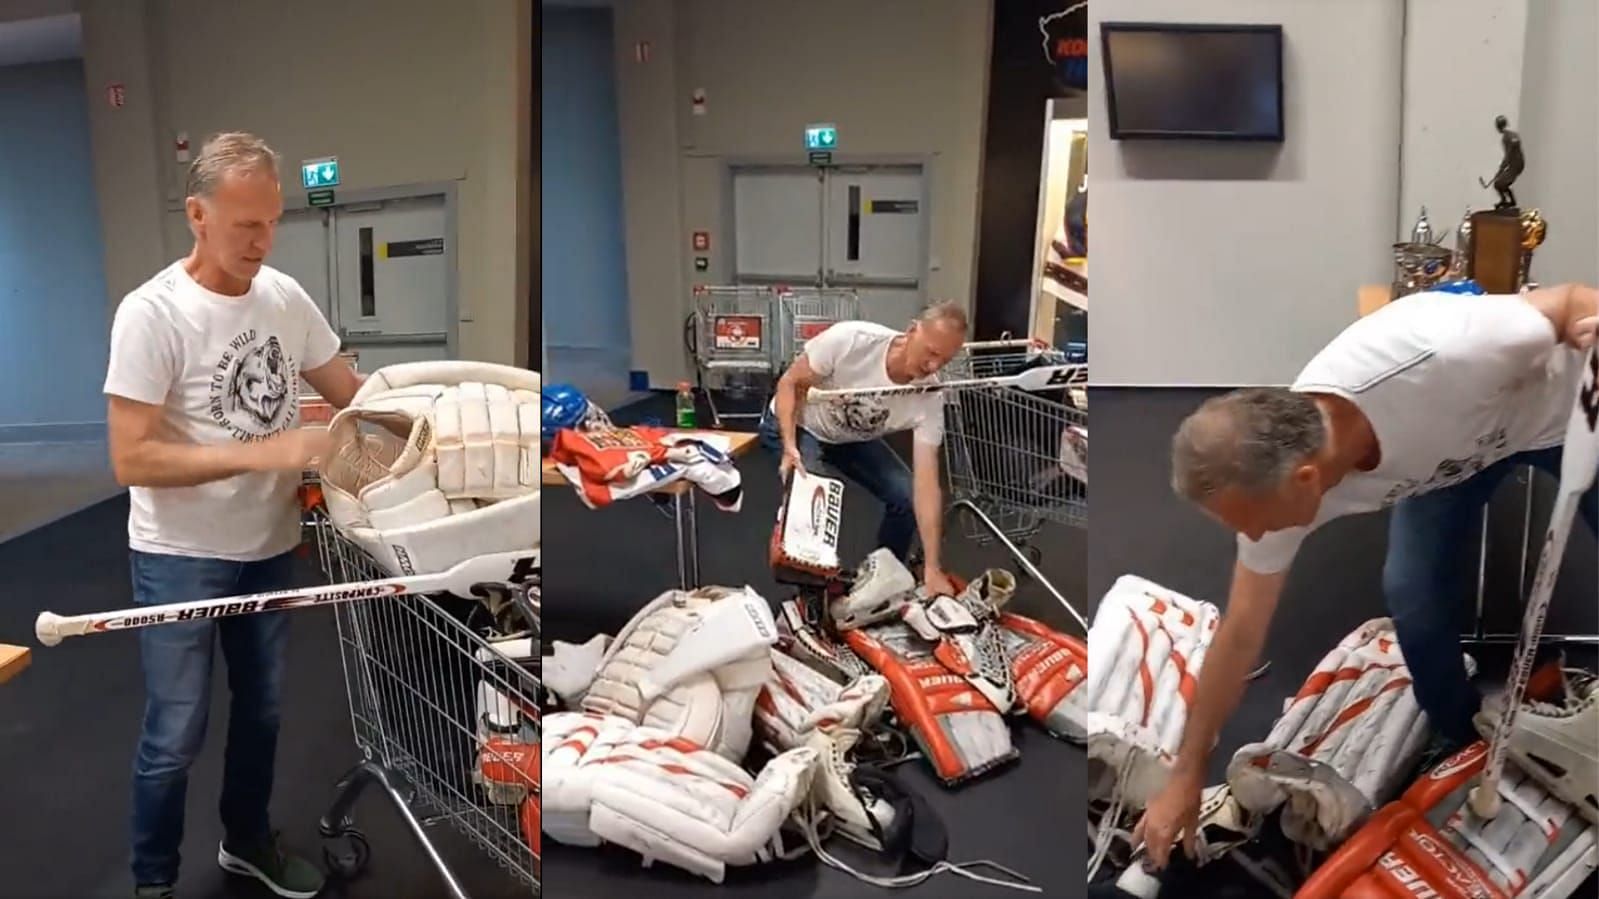 Dominik Hasek is seen collecting artifacts after Hall of Fame closure and fans are not happy